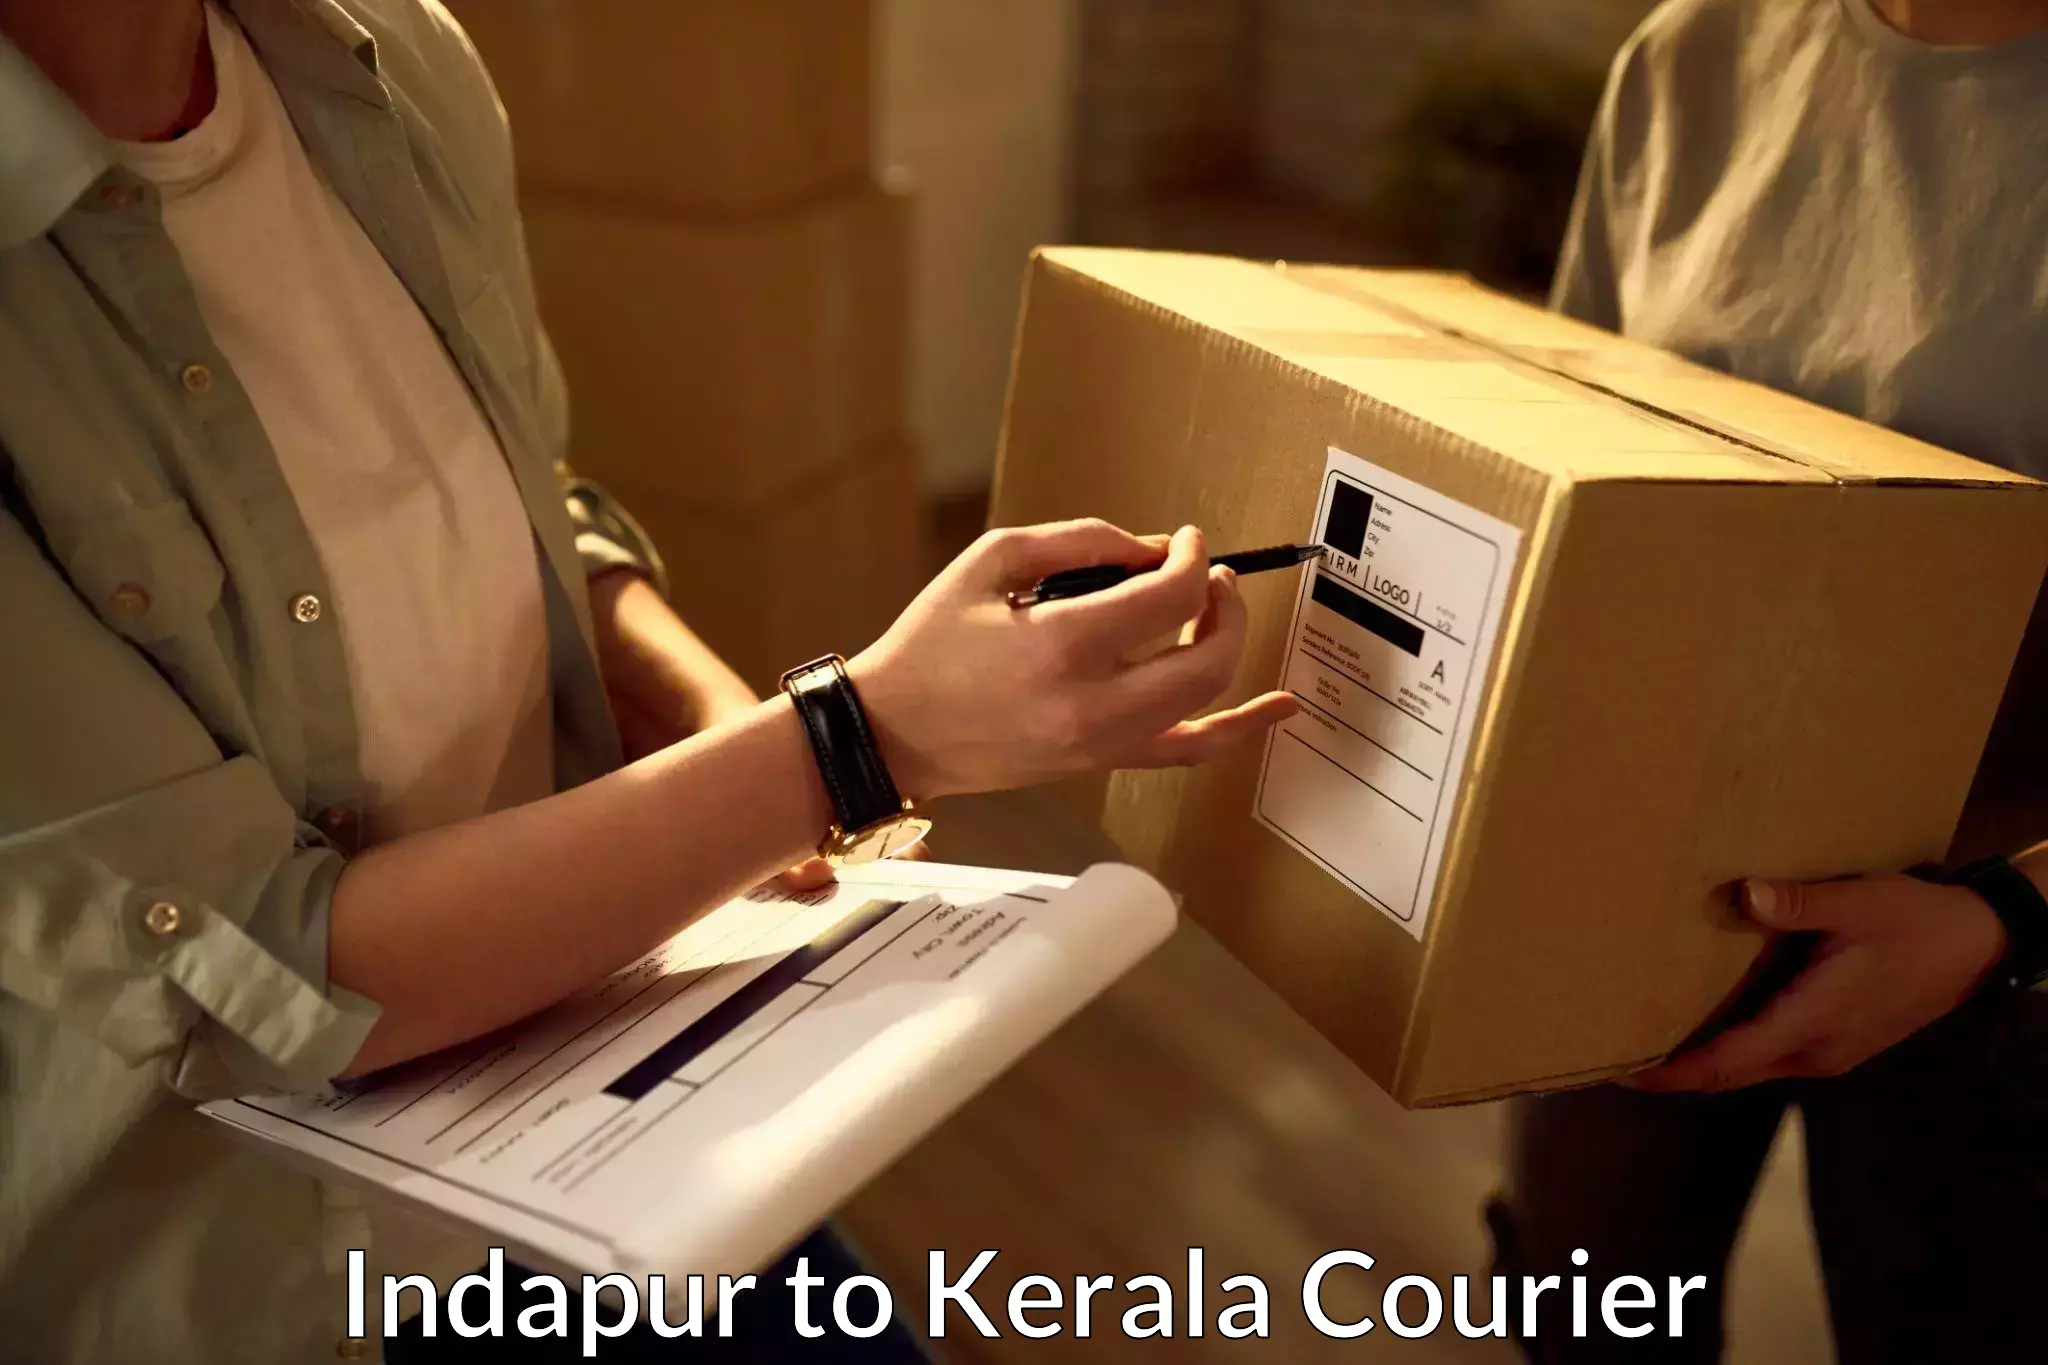 Easy return solutions Indapur to Kerala